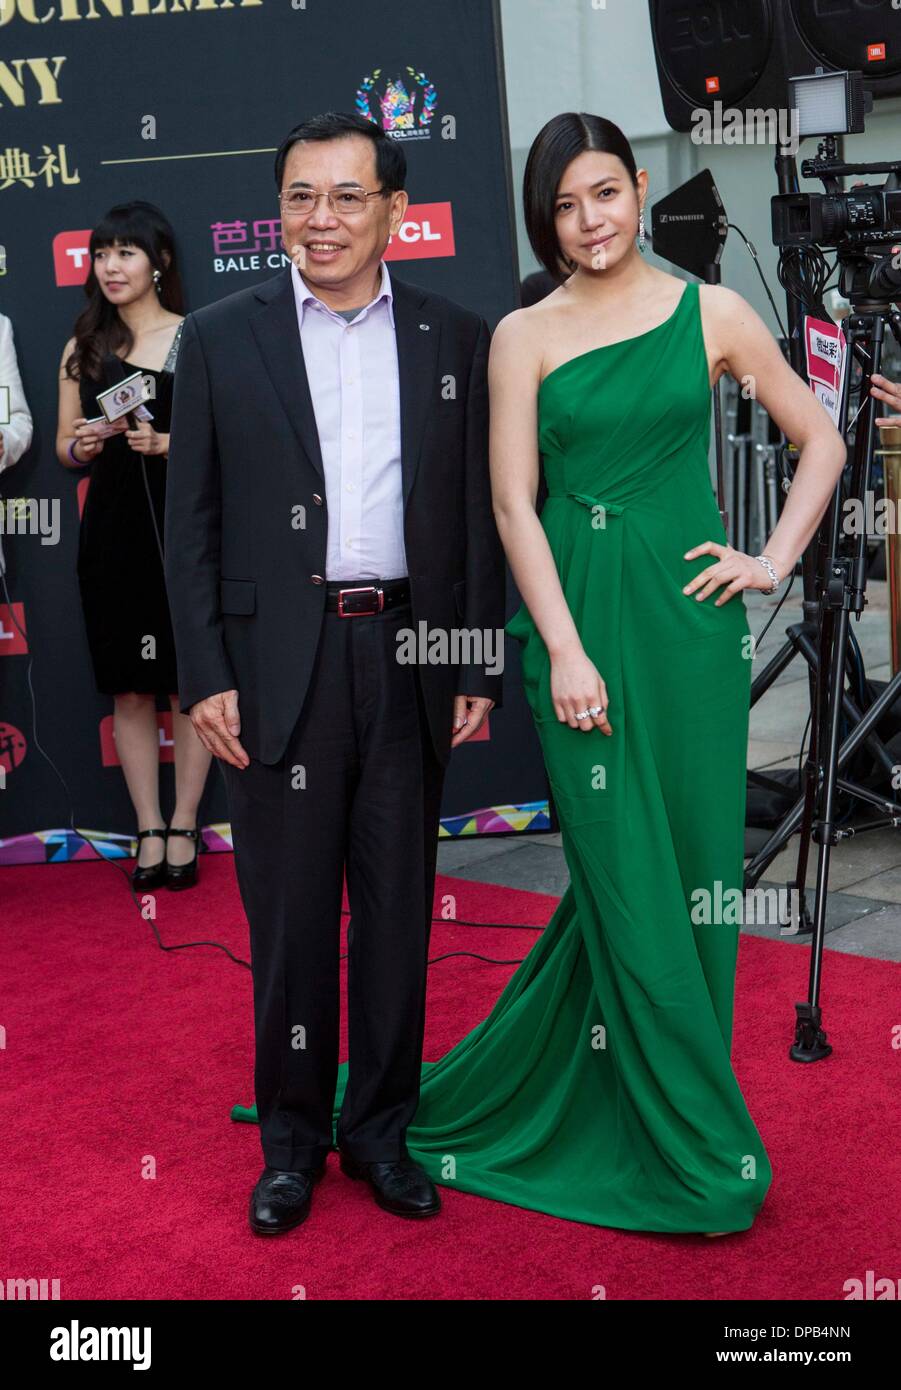 Los Angeles, USA. 10th Jan, 2014. Li Dongsheng (L), TCL chairman and CEO, and actress Michelle Chen arrive for the Hollywood TCL Microcinema Award Ceremony at TCL Chinese Theater in Los Angeles, the United States, Jan. 10, 2014. © Zhao Hanrong/Xinhua/Alamy Live News Stock Photo